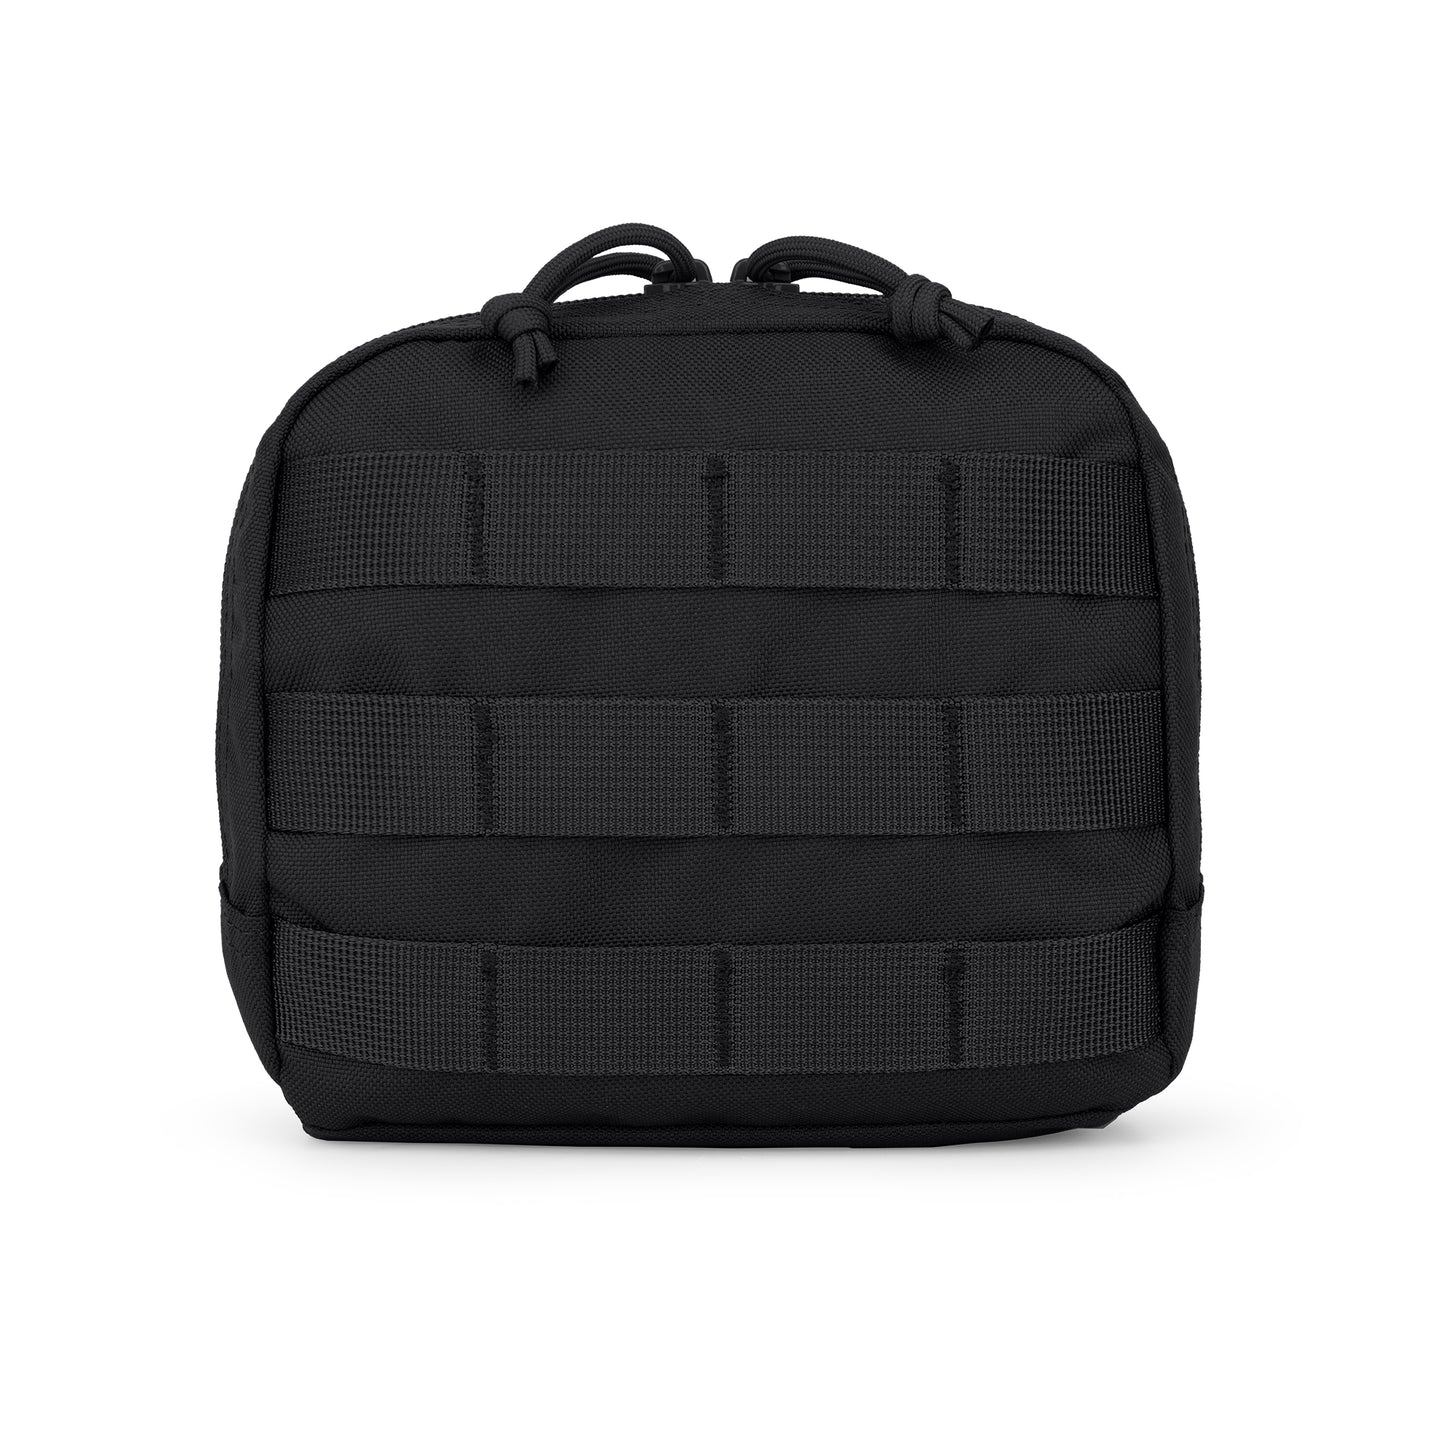 [M6403] Mardingtop Small Tactical Pouch